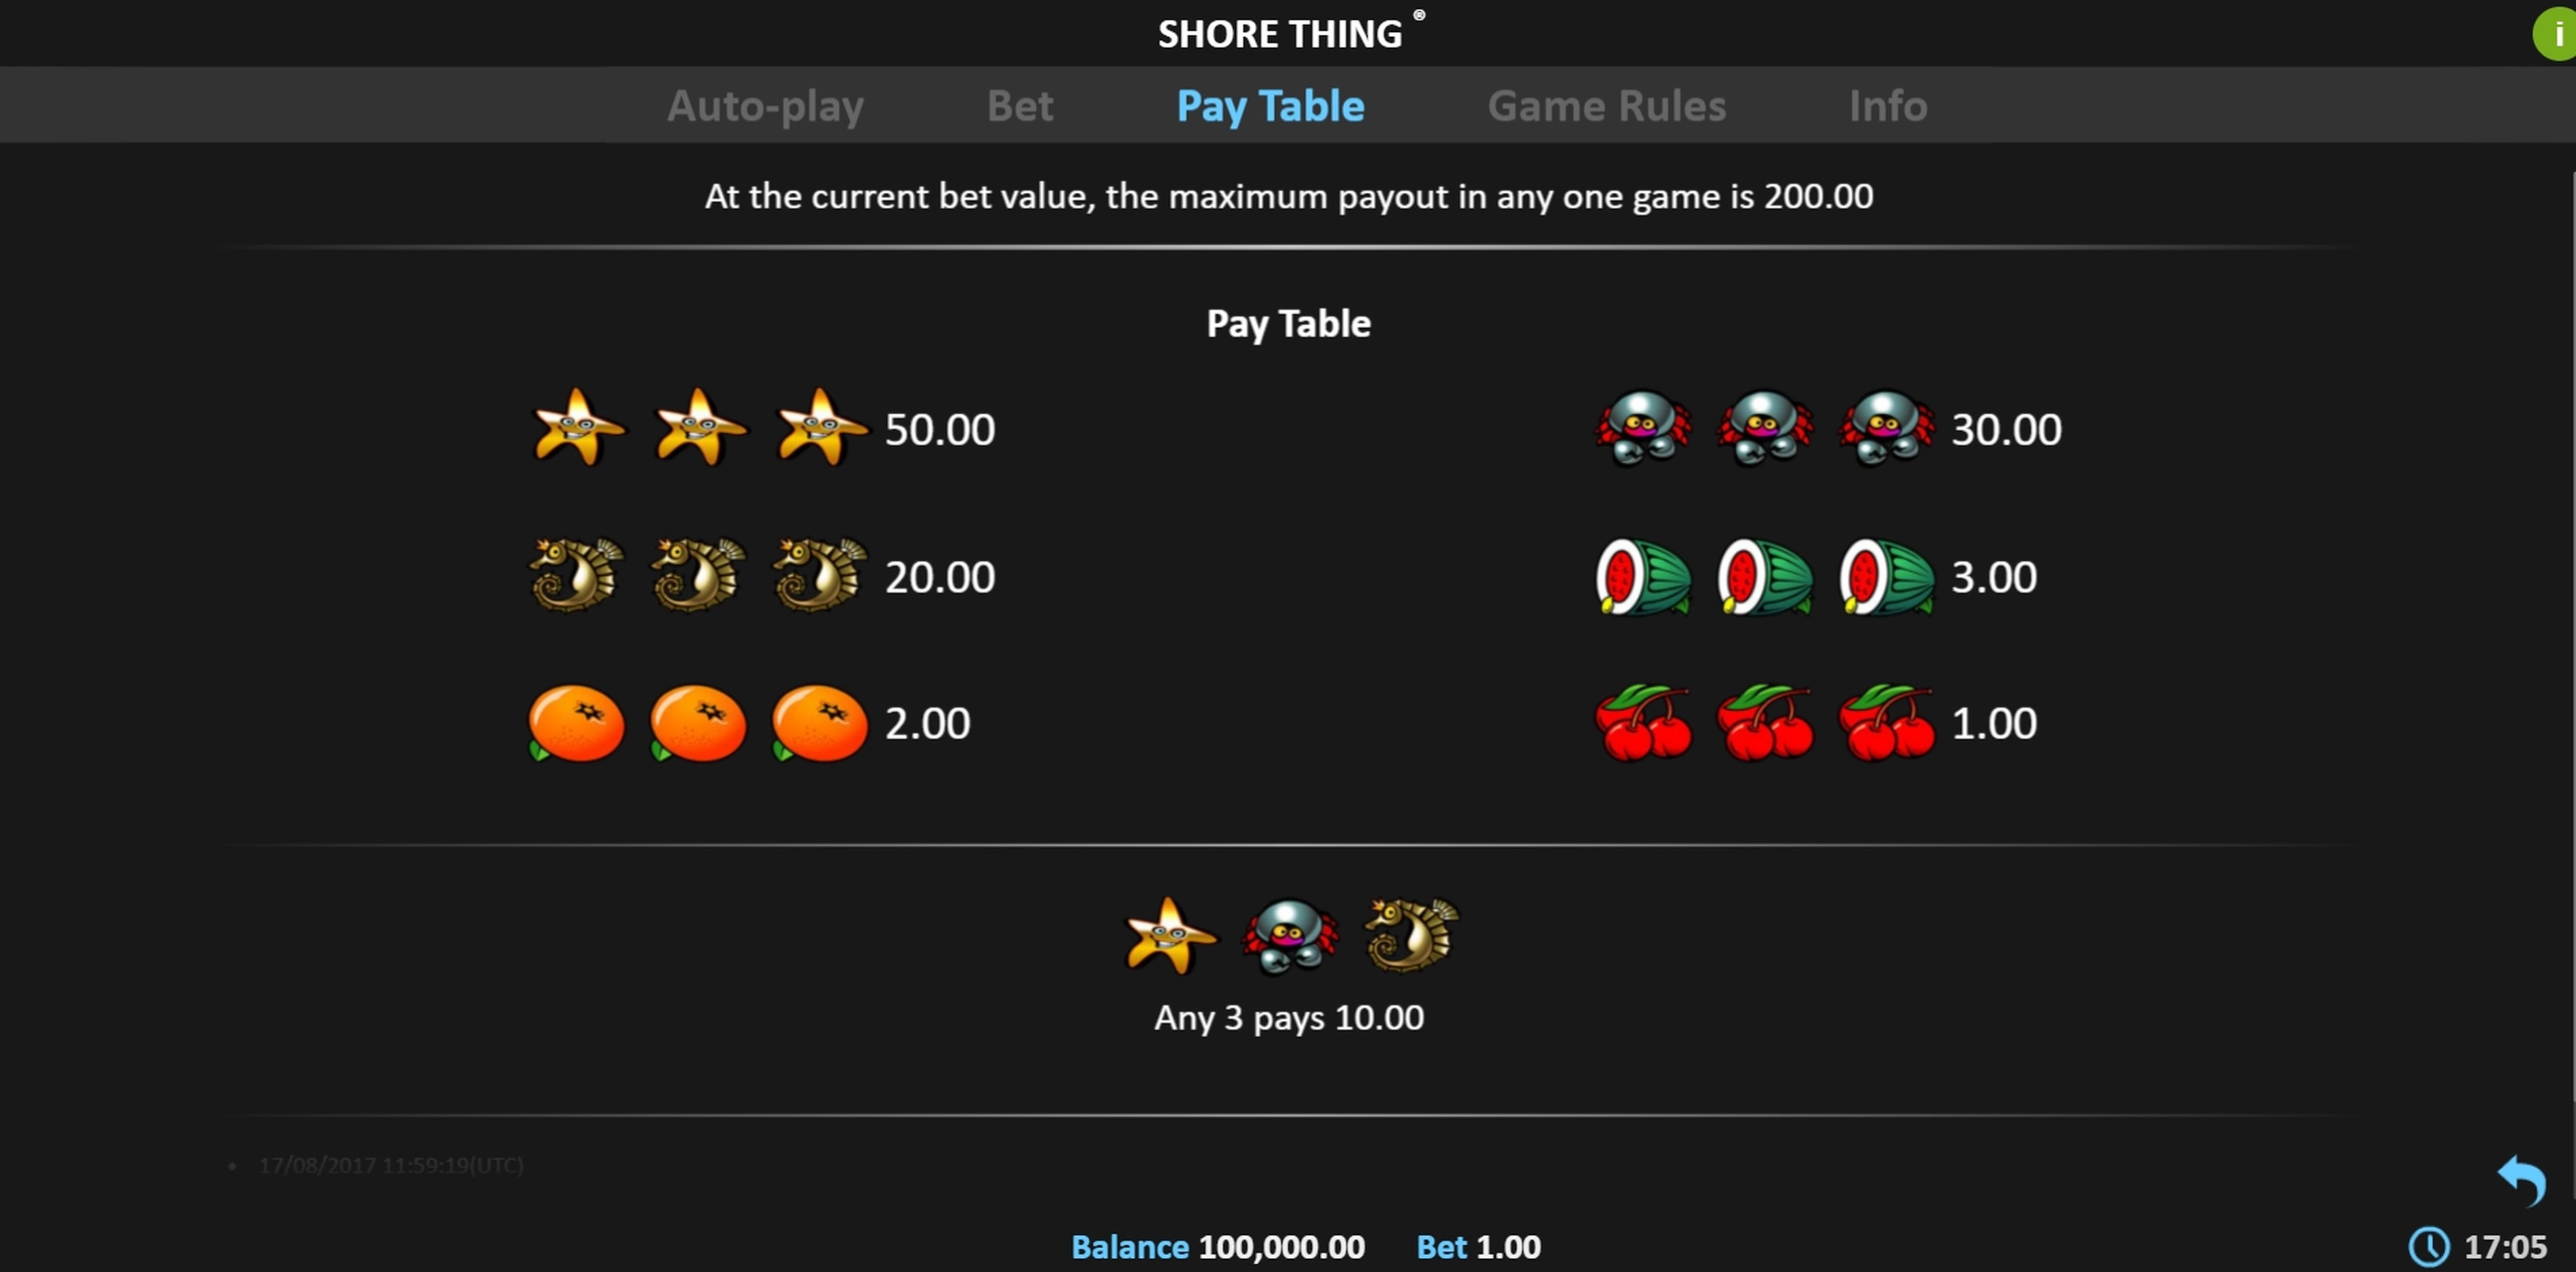 Info of Shore Thing Pull Tab Slot Game by Realistic Games